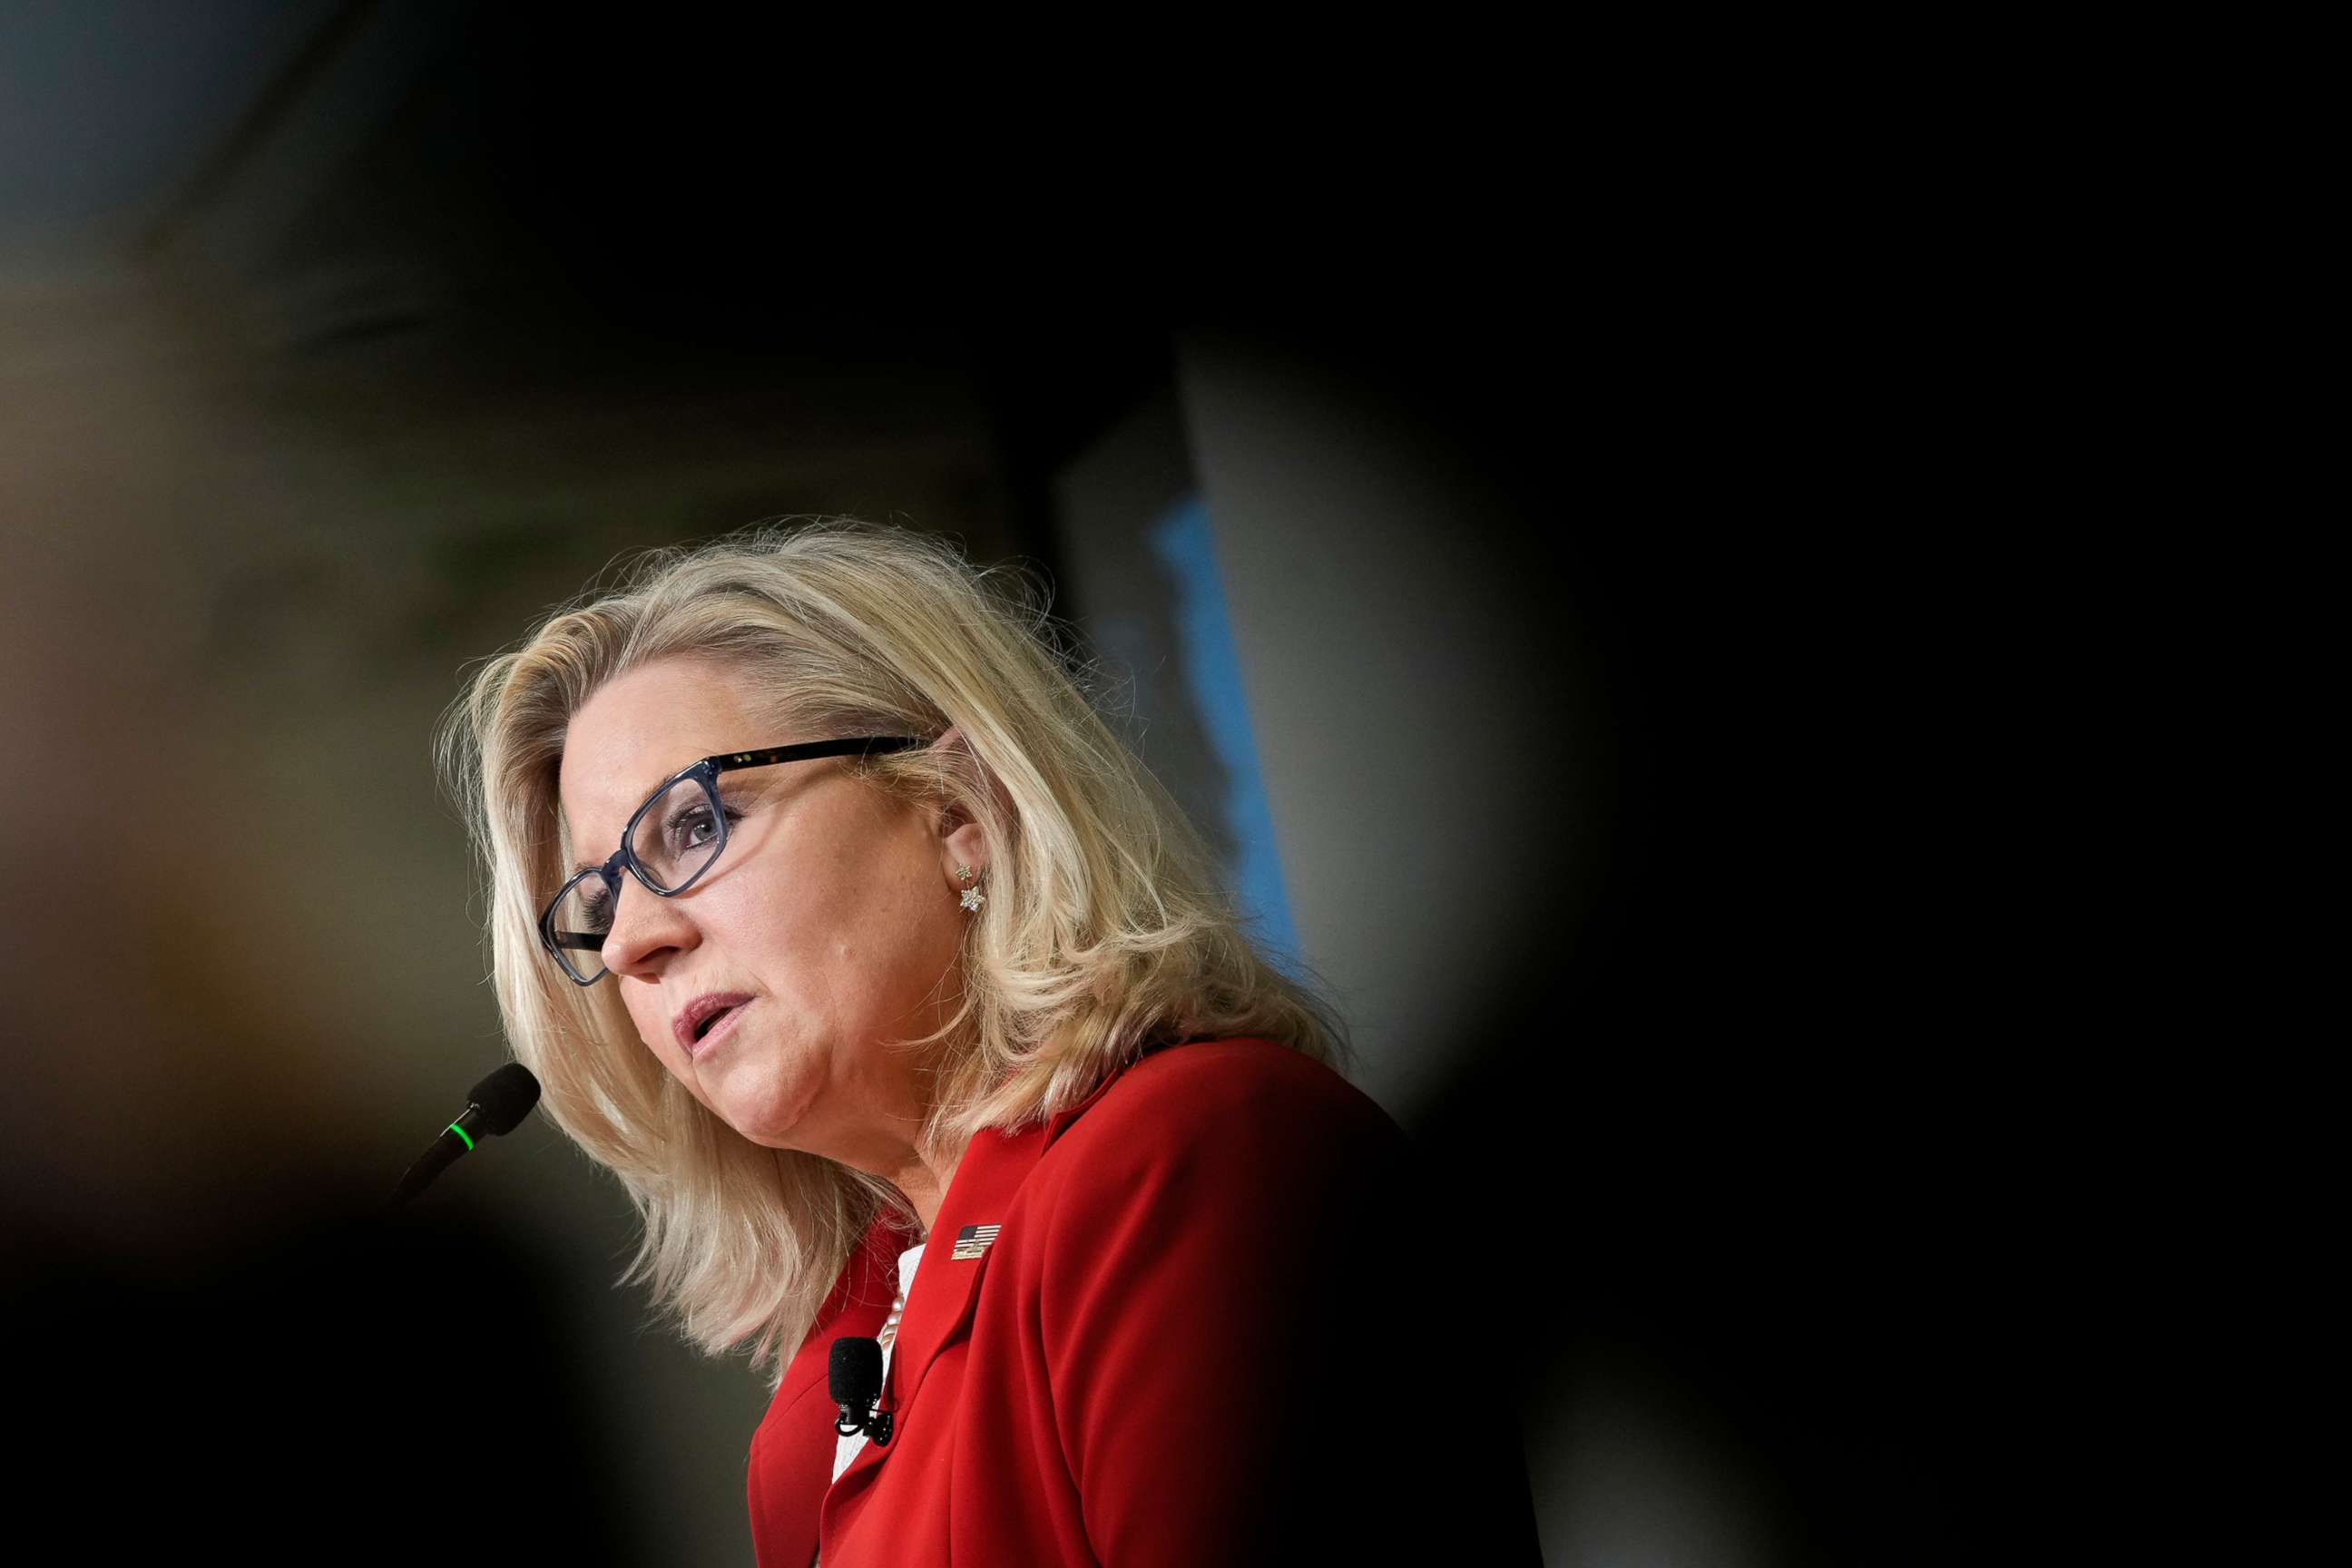 PHOTO: Rep. Liz Cheney vice chairwoman at American Enterprise Institute on Sept. 19, 2022 in Washington, D.C. 